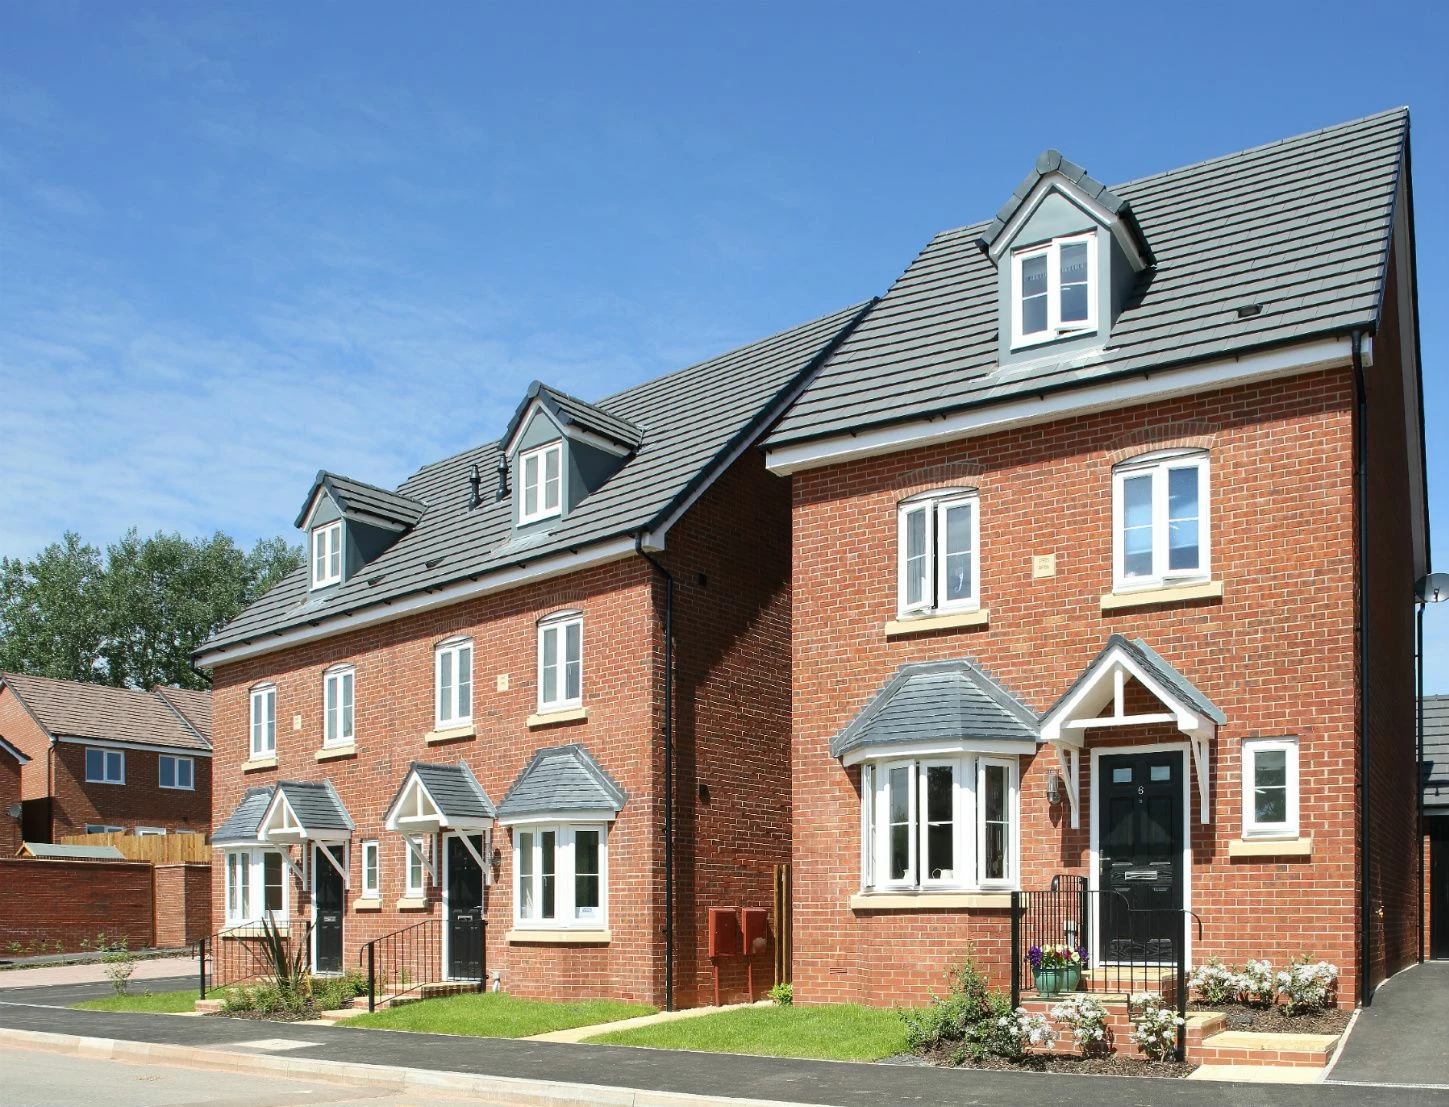 An extra storey makes all the difference at Chase Wood View 